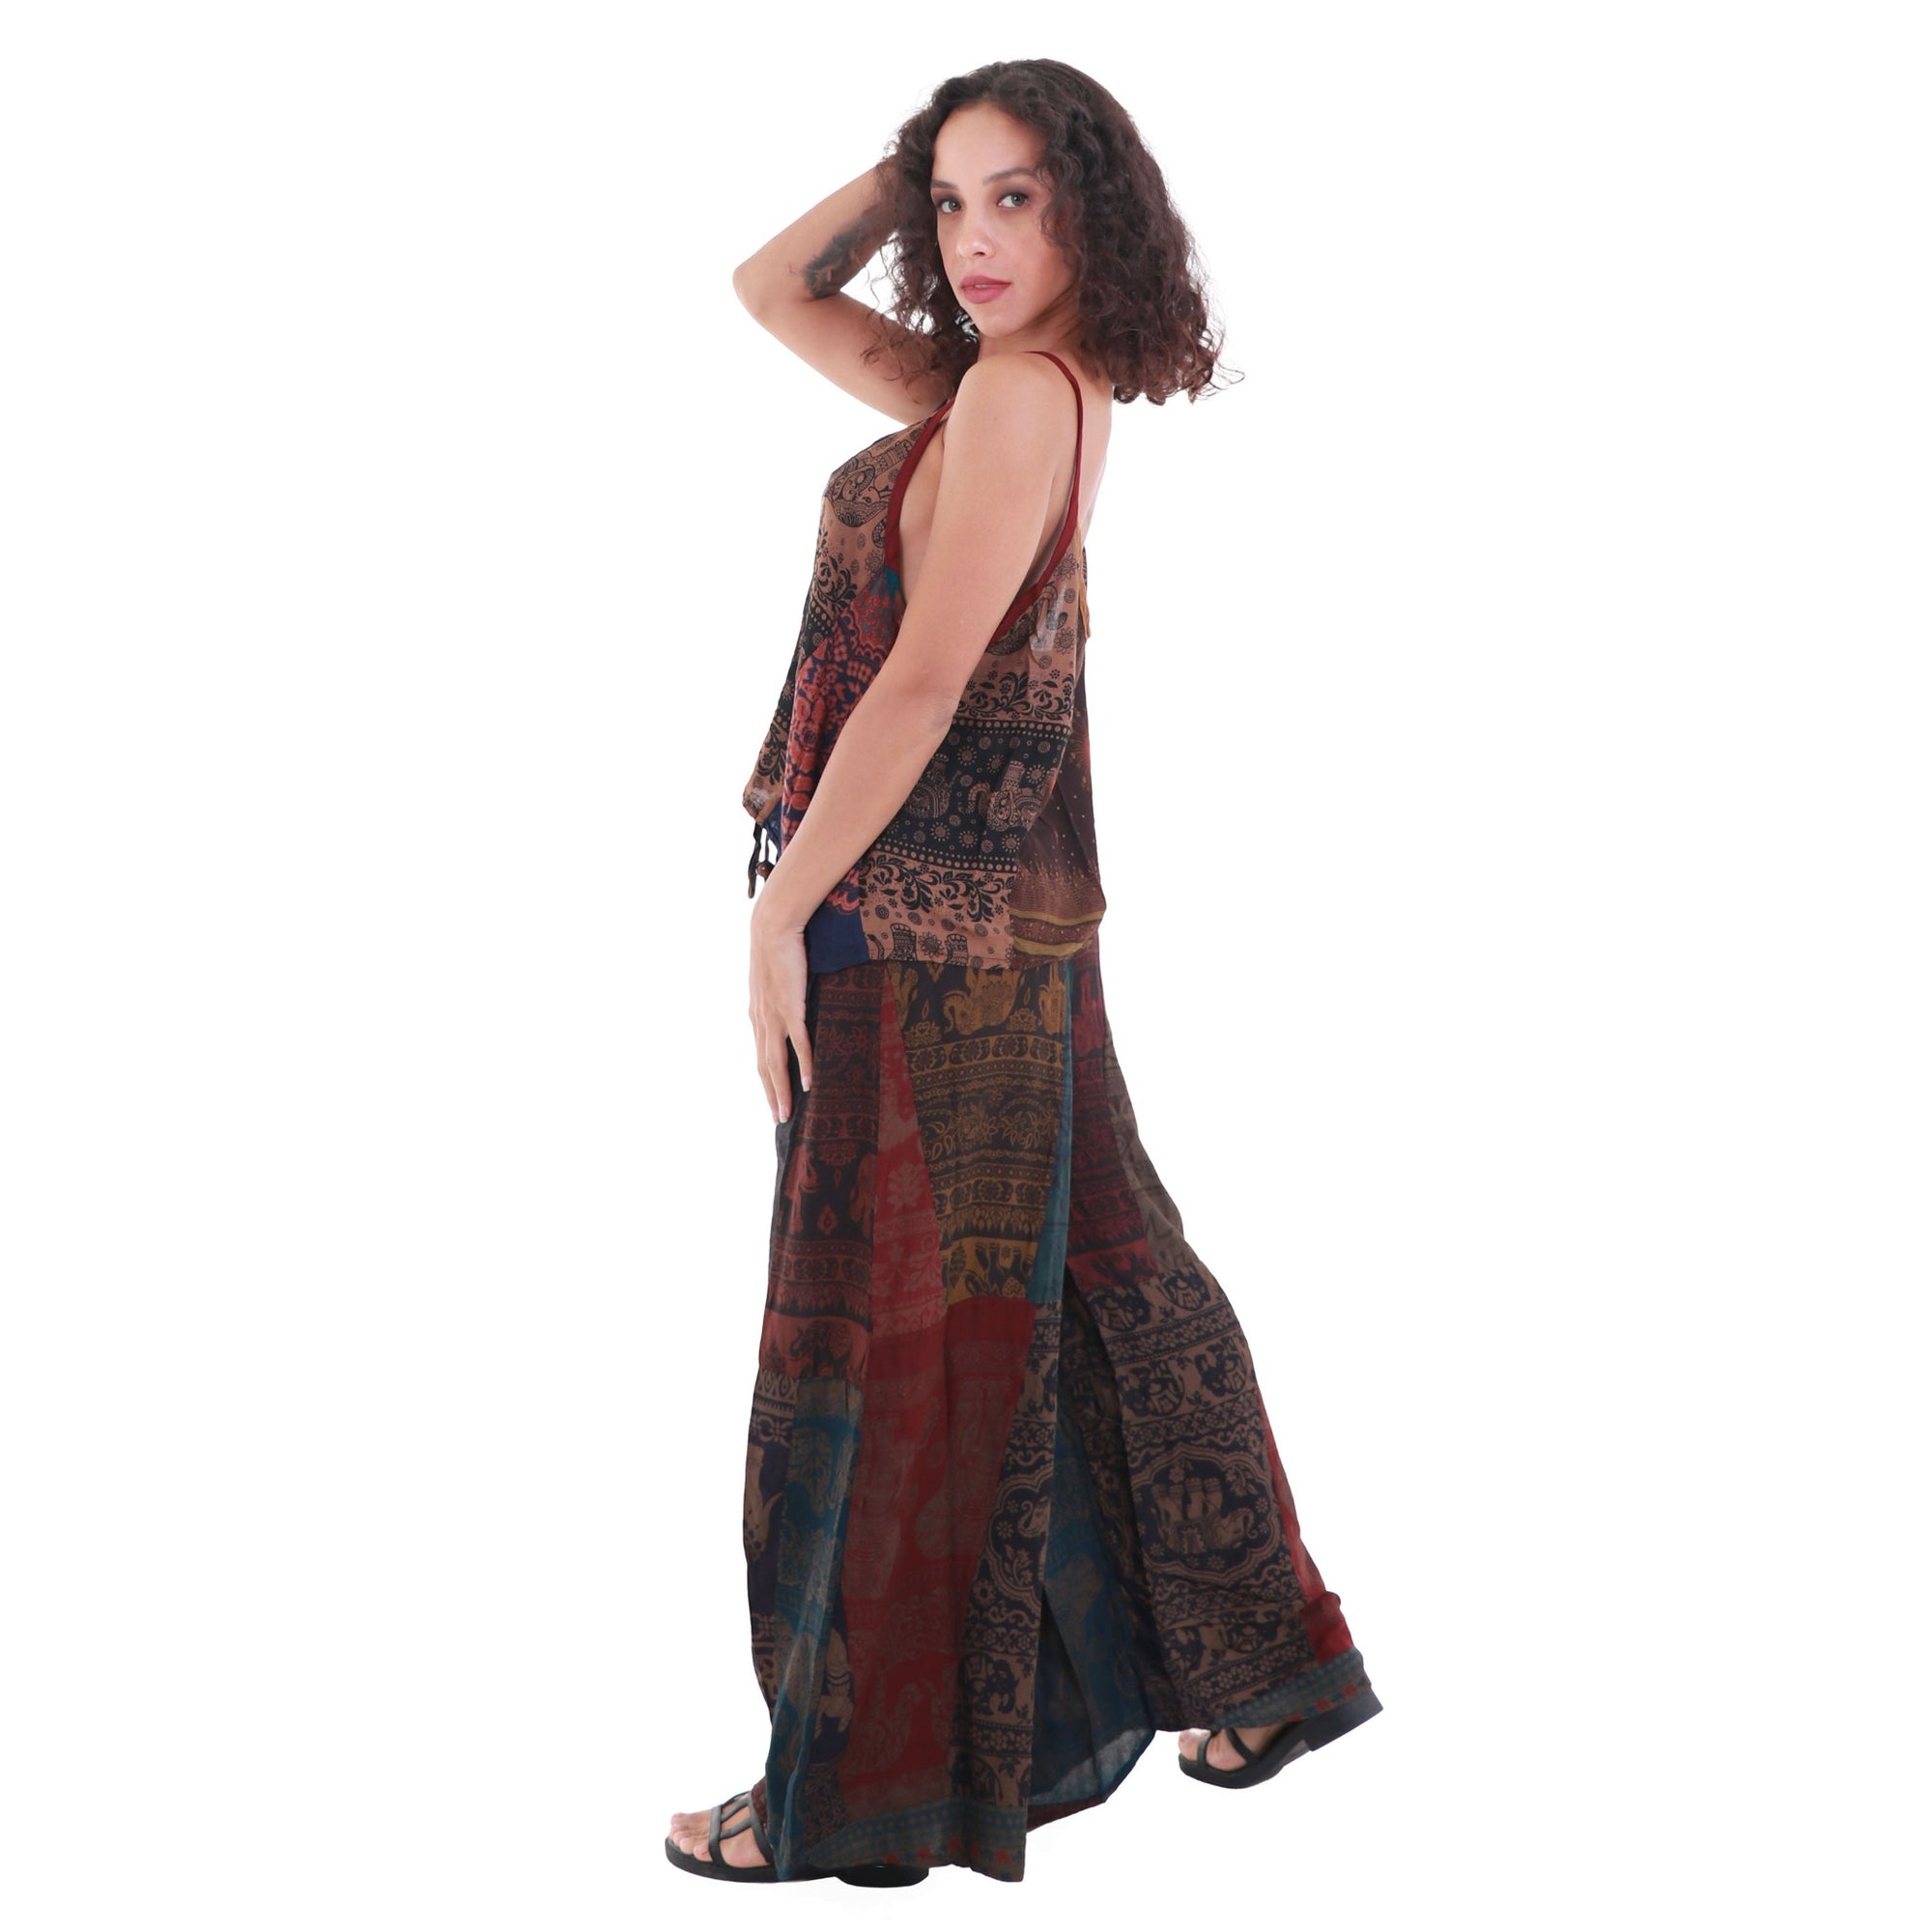 Upcycled Rayon Patchwork Wide-Leg Drawstring Pants